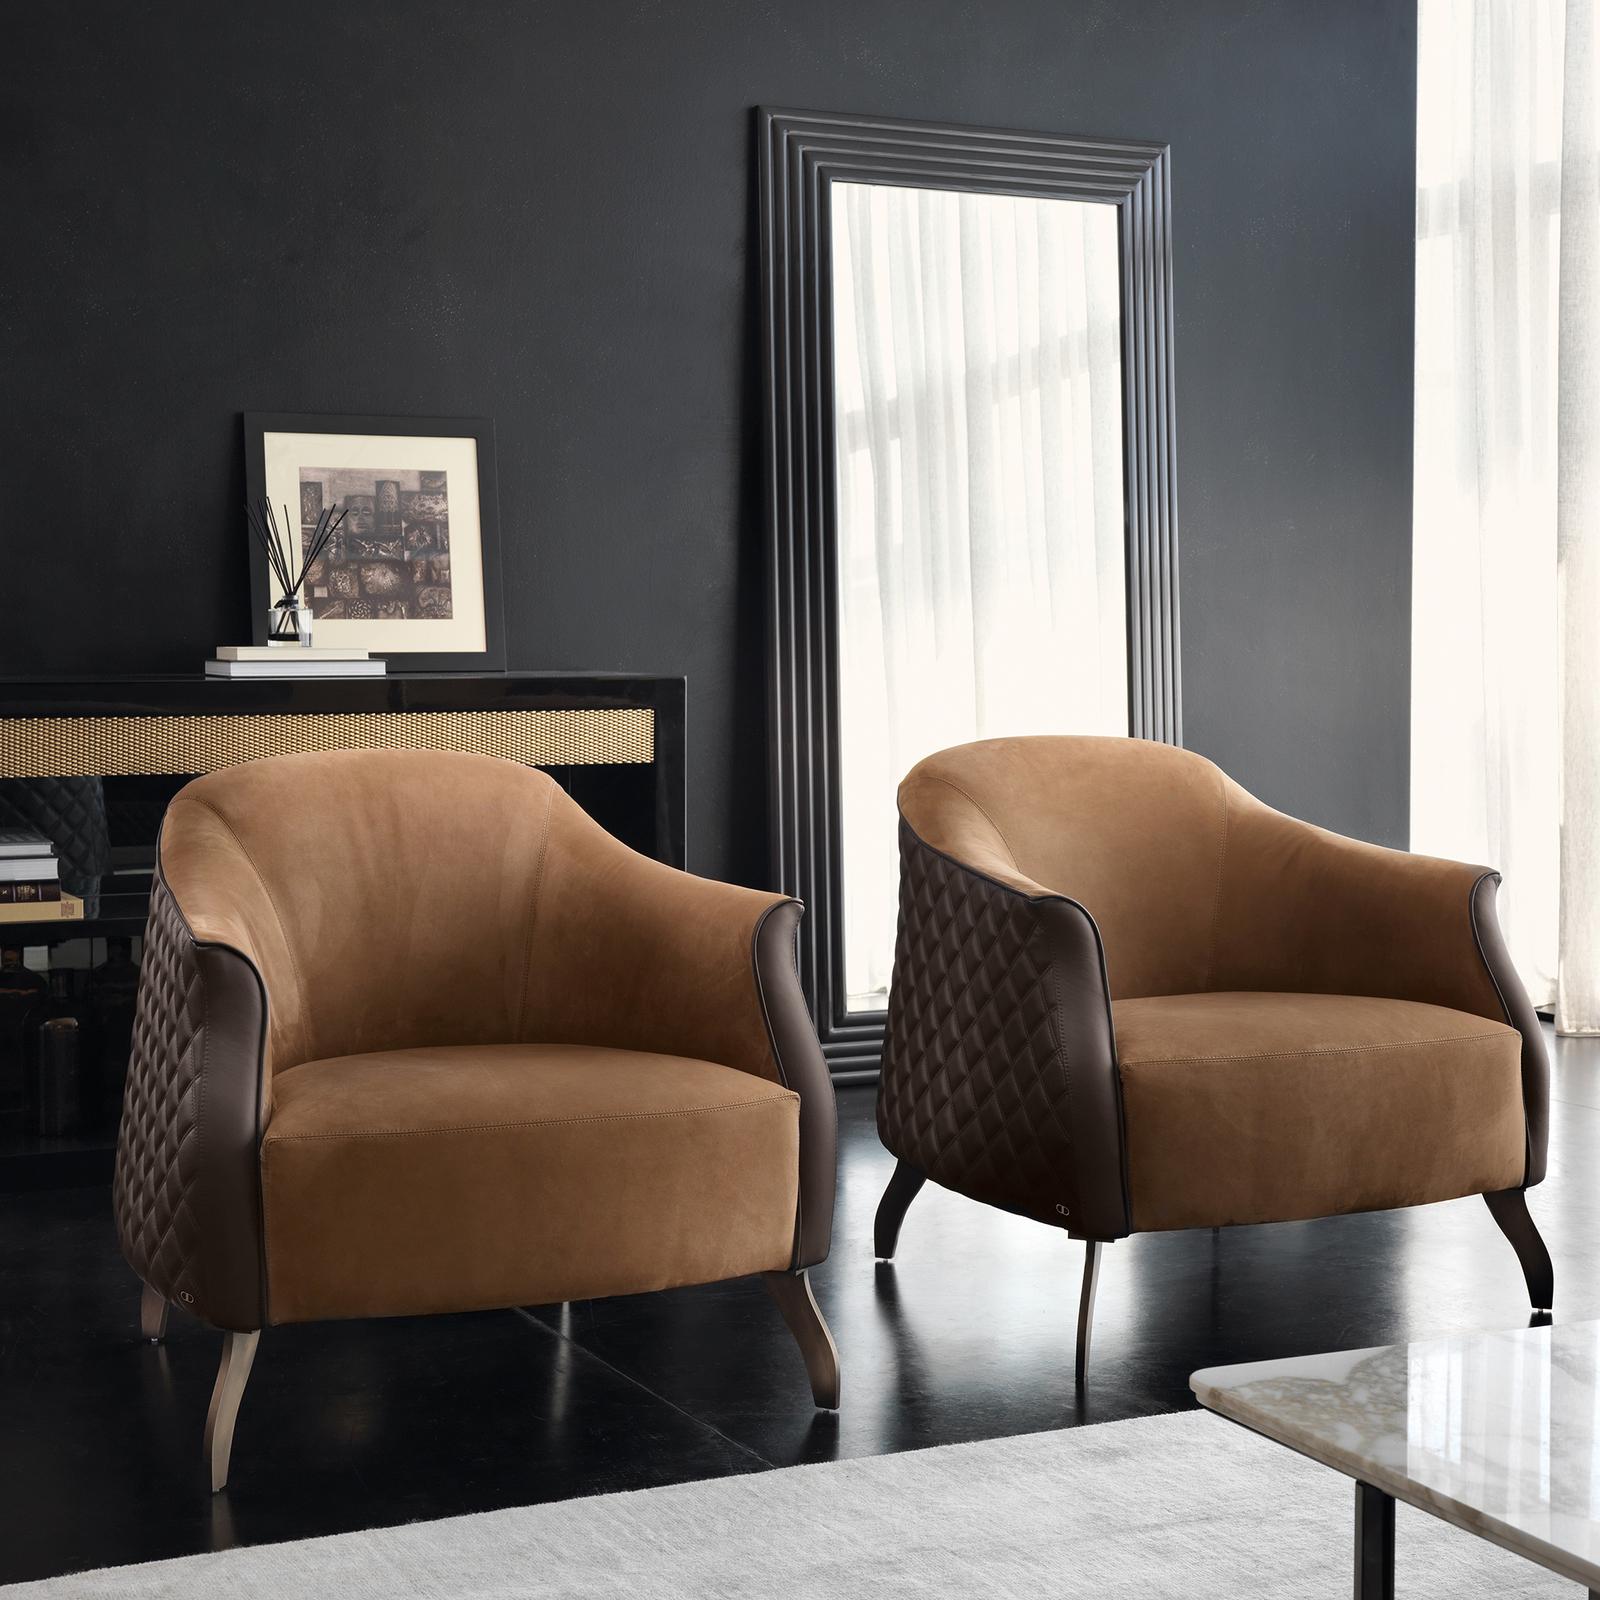 The superbly elegant Olimpia Armchair features a structure in plywood, covered with rubber, air soft and goose down and Memory foam on cushions and seat. The feet are finished in burnished brass and the outer shell features an exquisite quilted